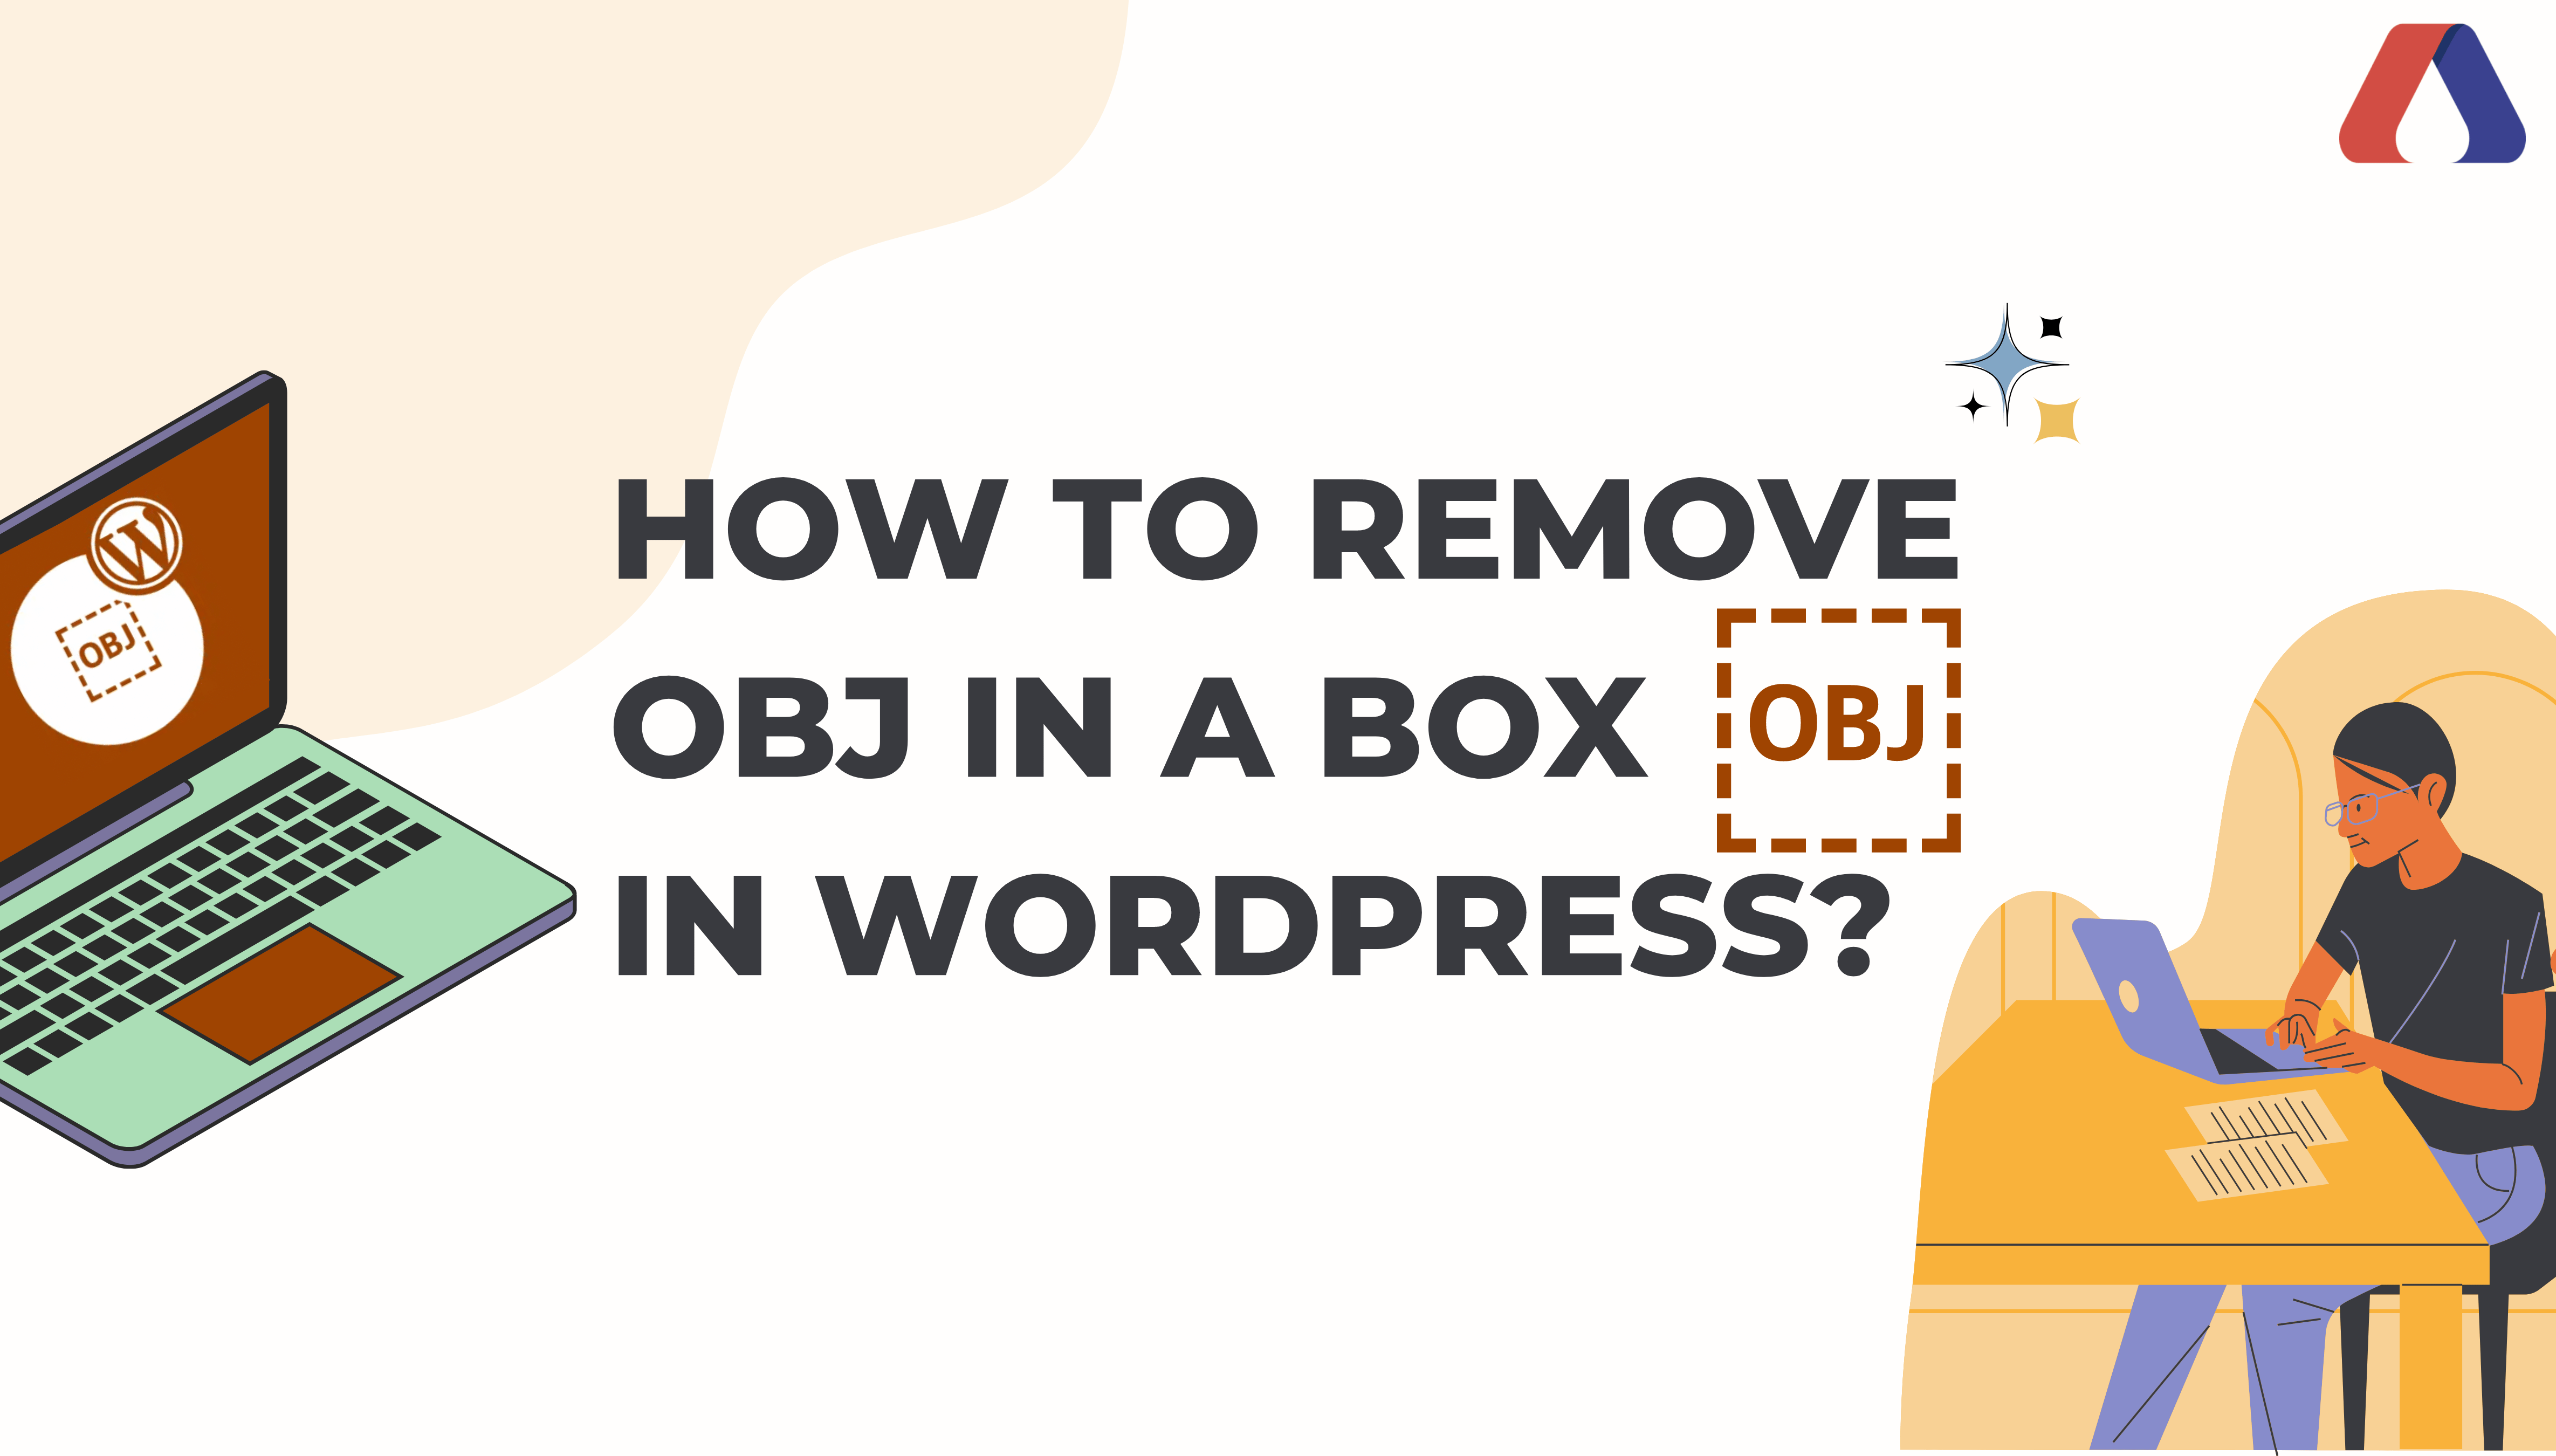 How to Remove OBJ in a Box in WordPress